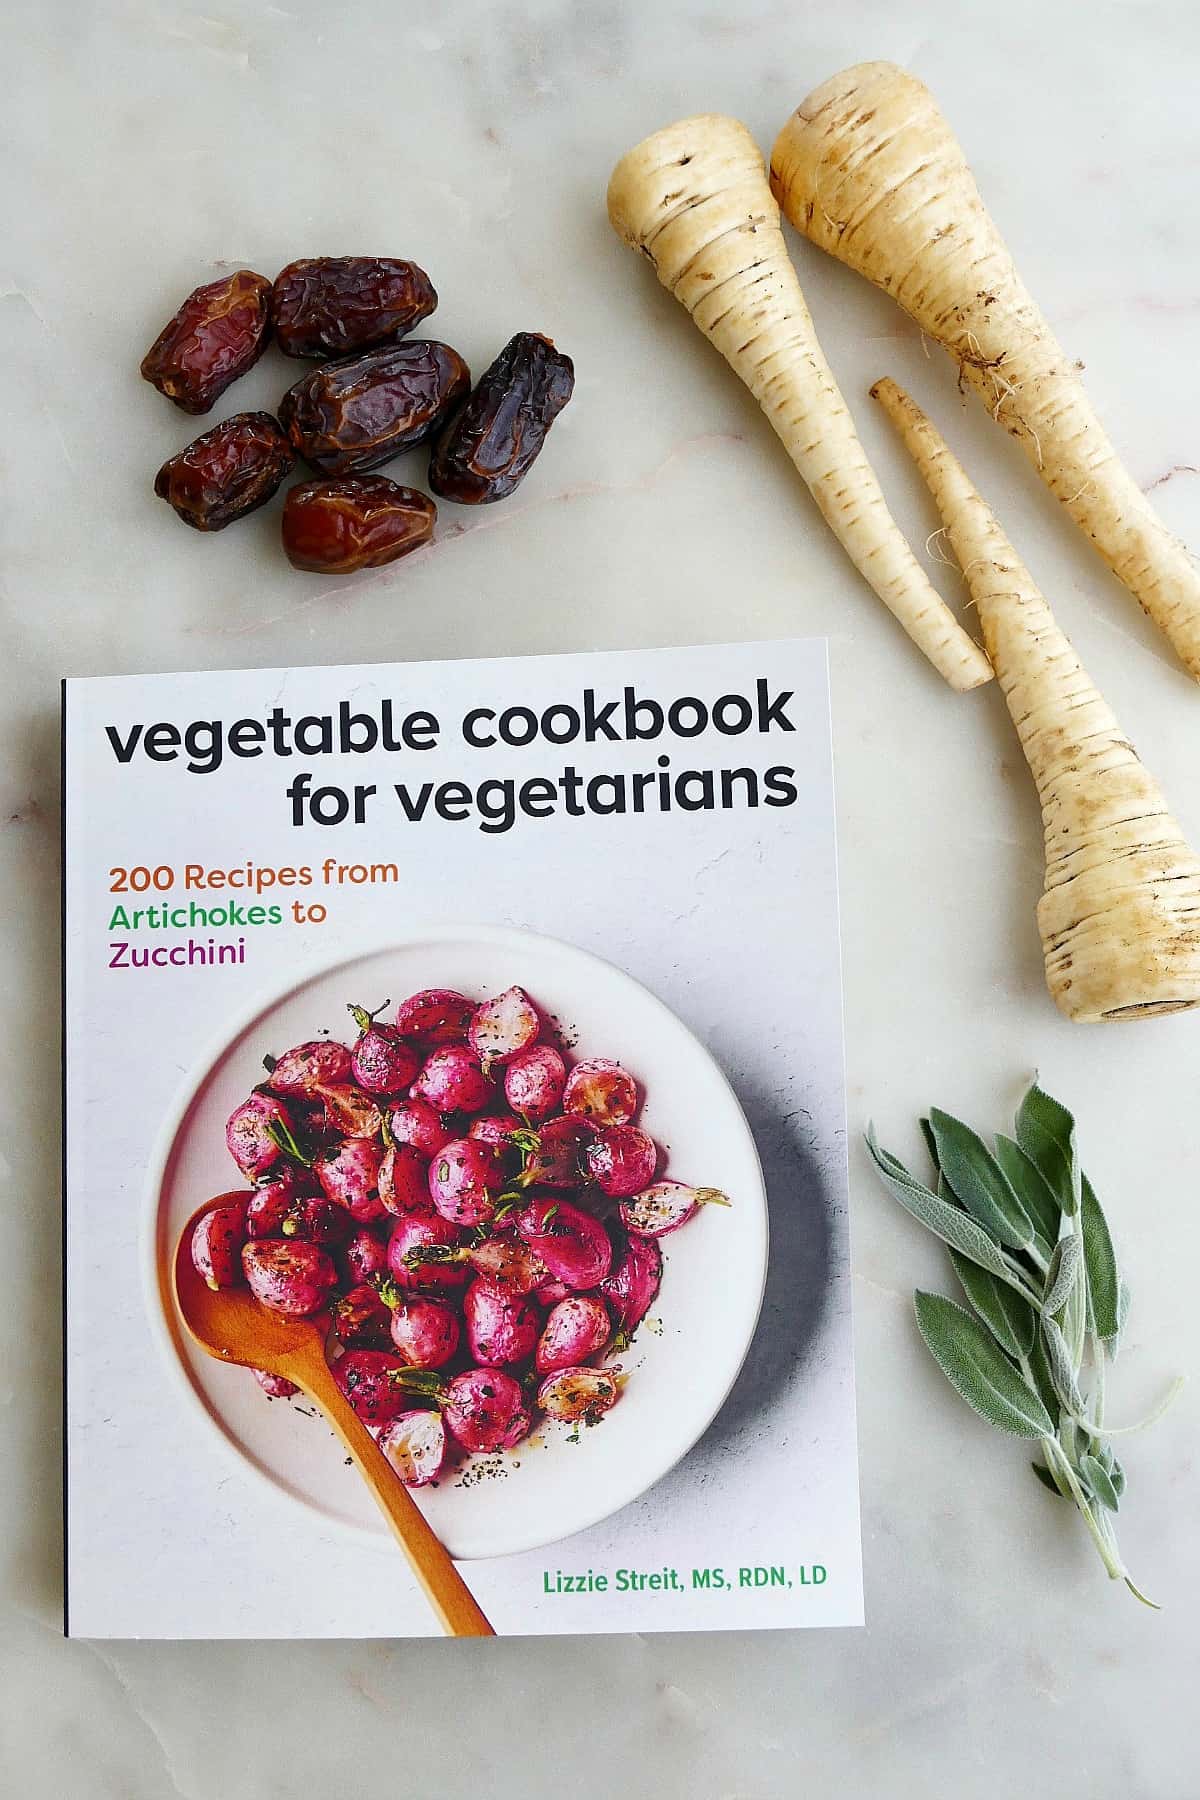 dates, parsnips, and sage leaves on a counter next to a paperback copy of a cookbook